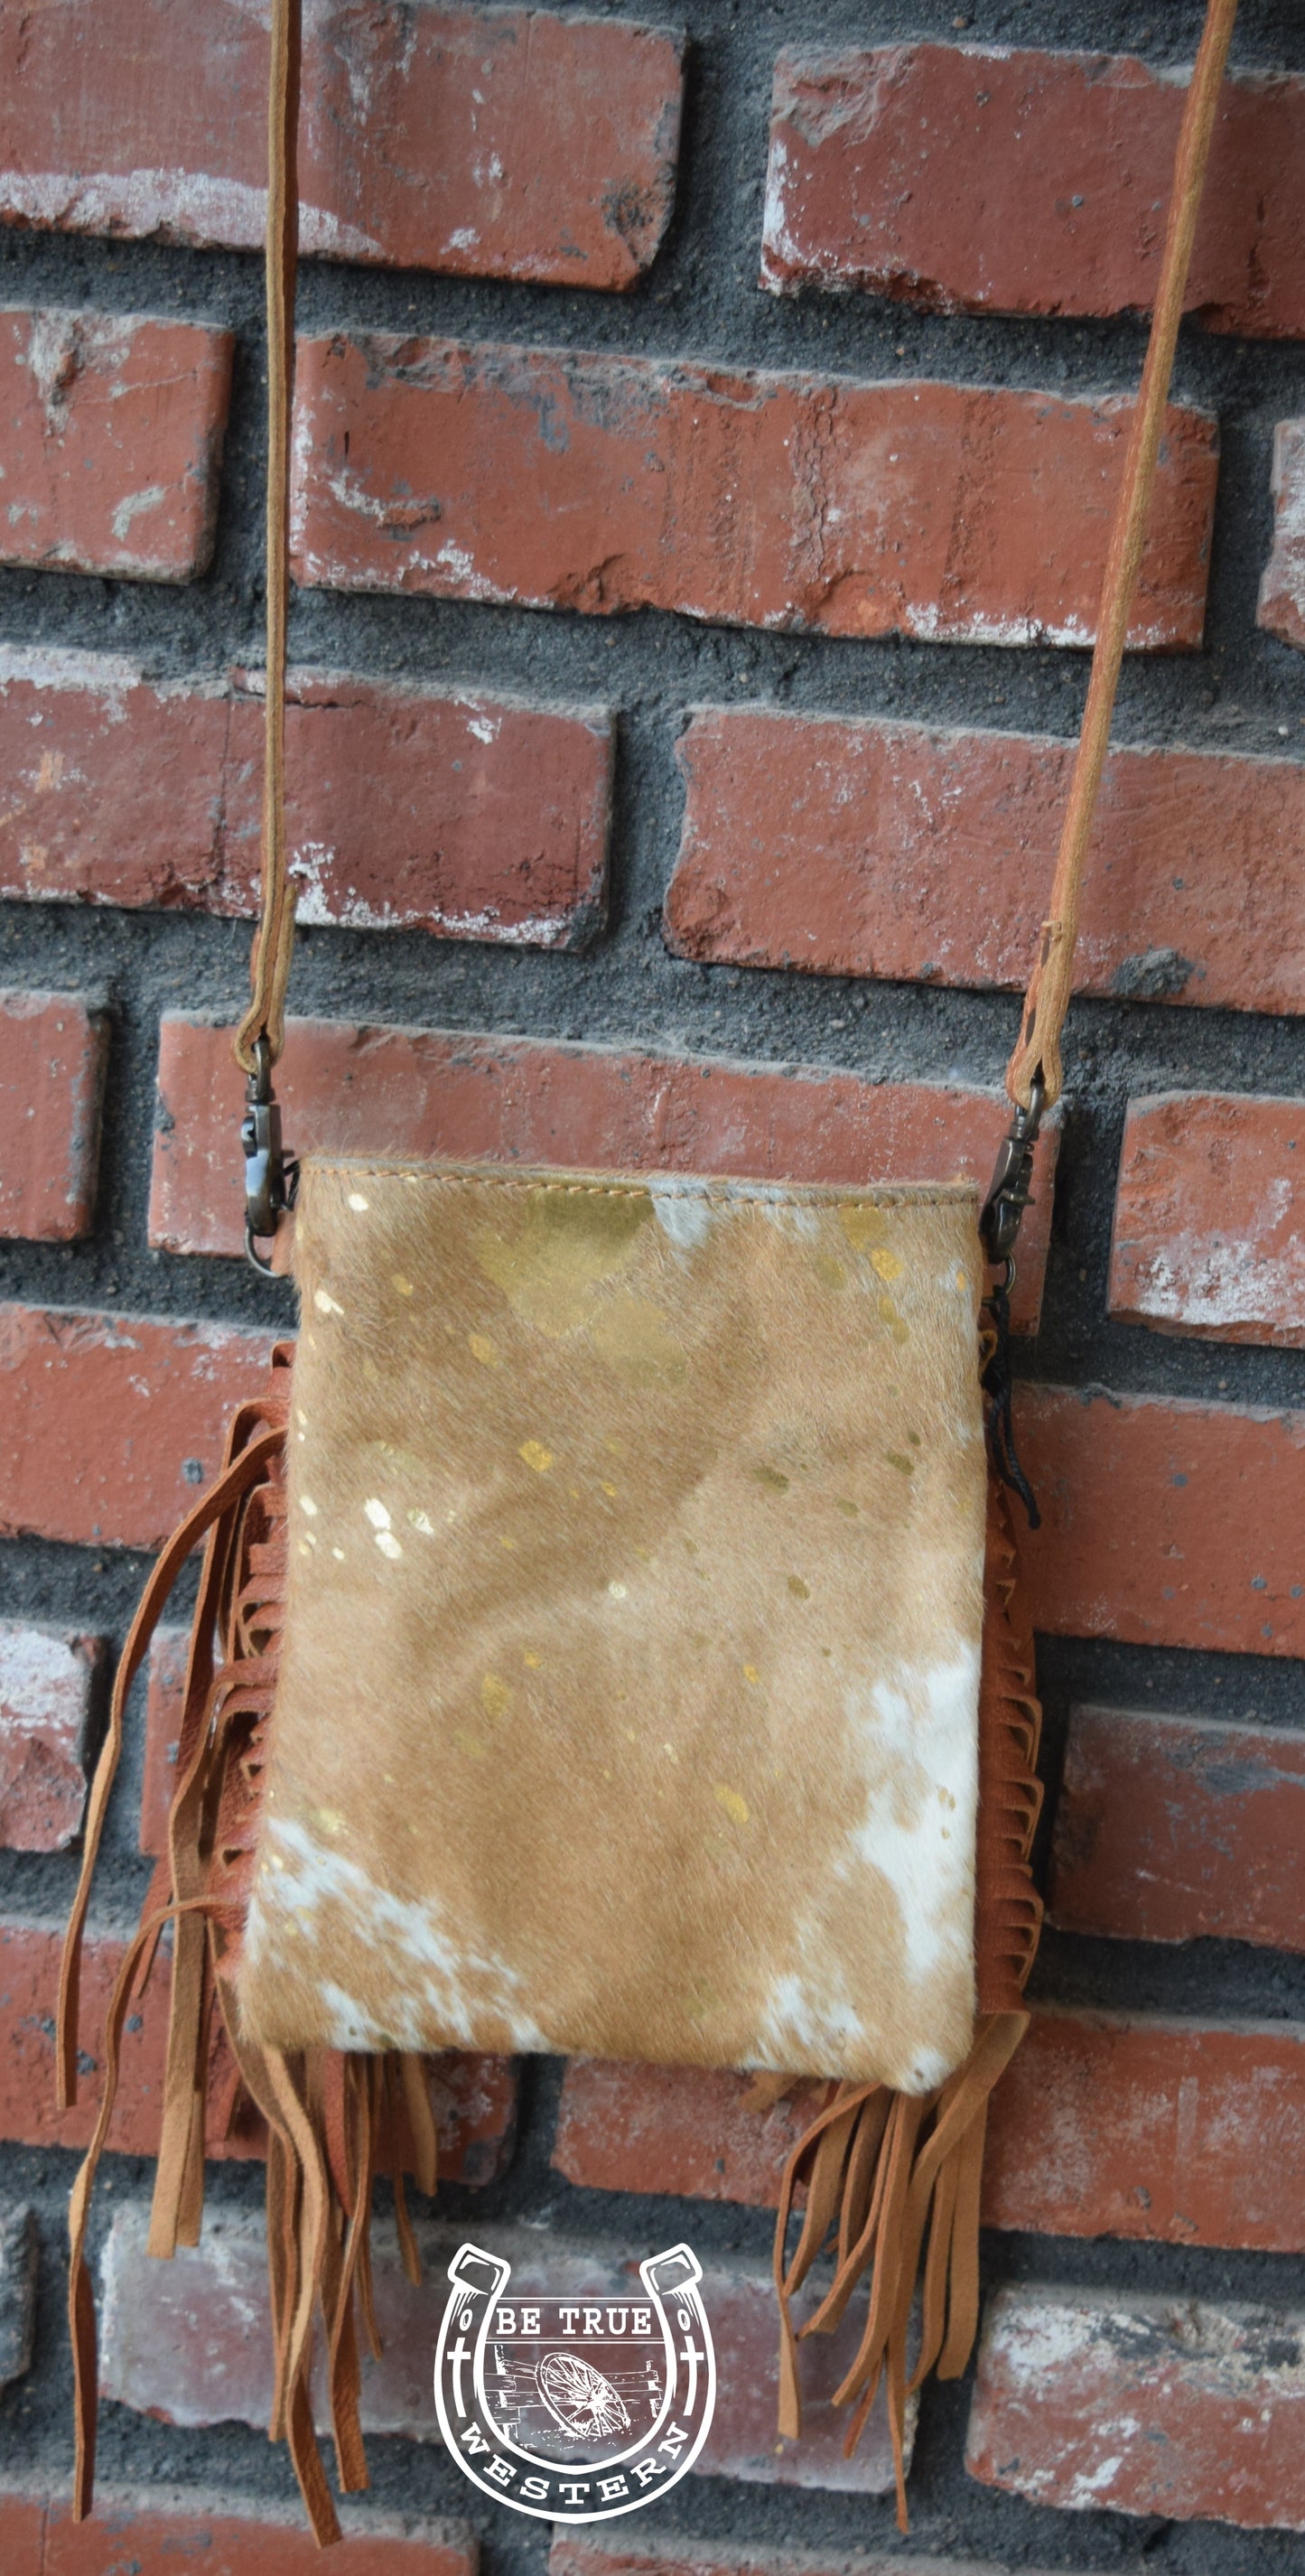 The Tan Acid Washed Cowhide Purse